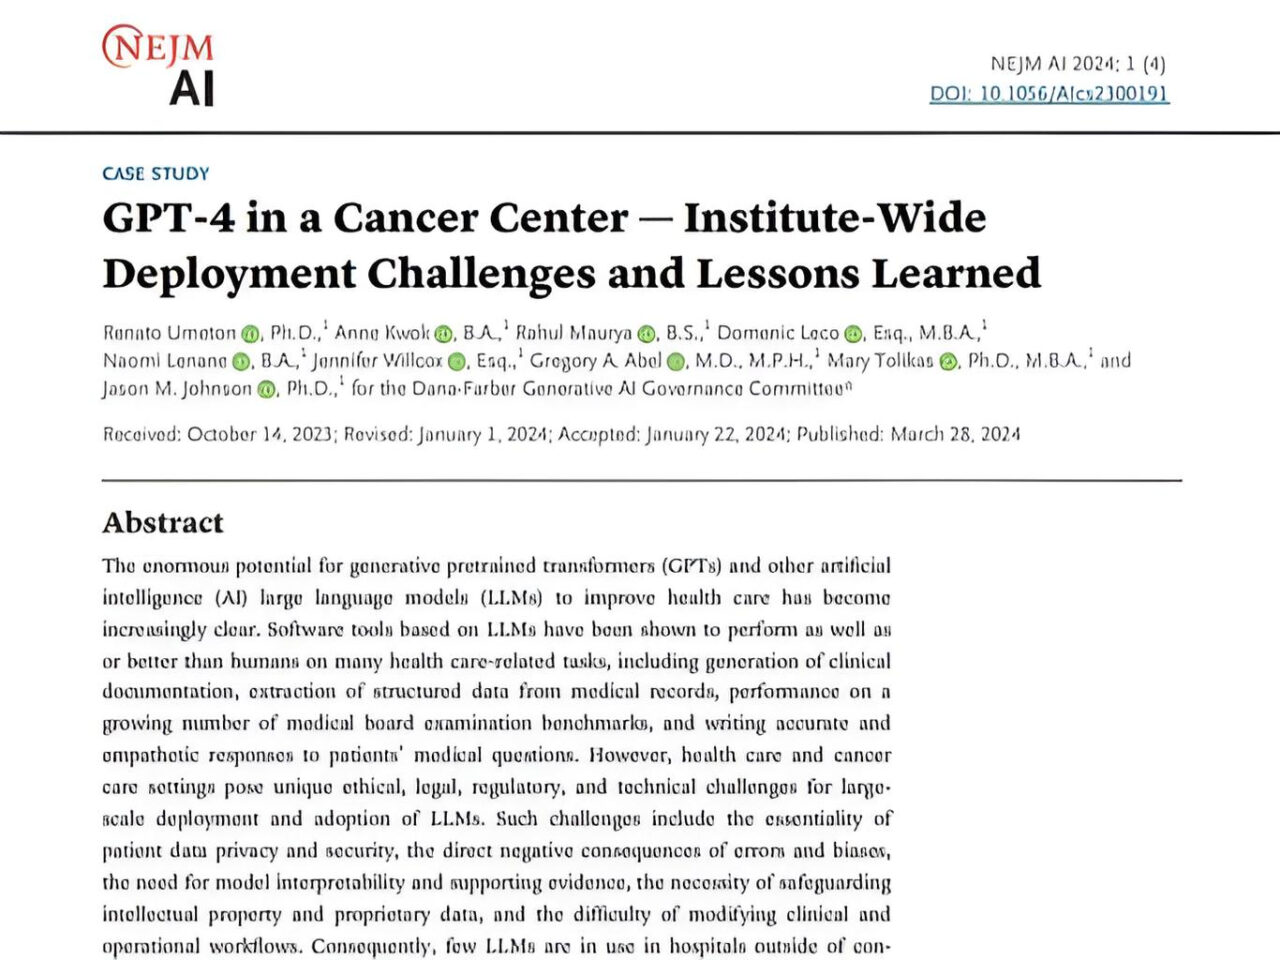 Douglas Flora: NEJM AI and the team at Dana-Farber Cancer Center just published a great case study in which they revealed some insights following the (careful) deployment of generative AI